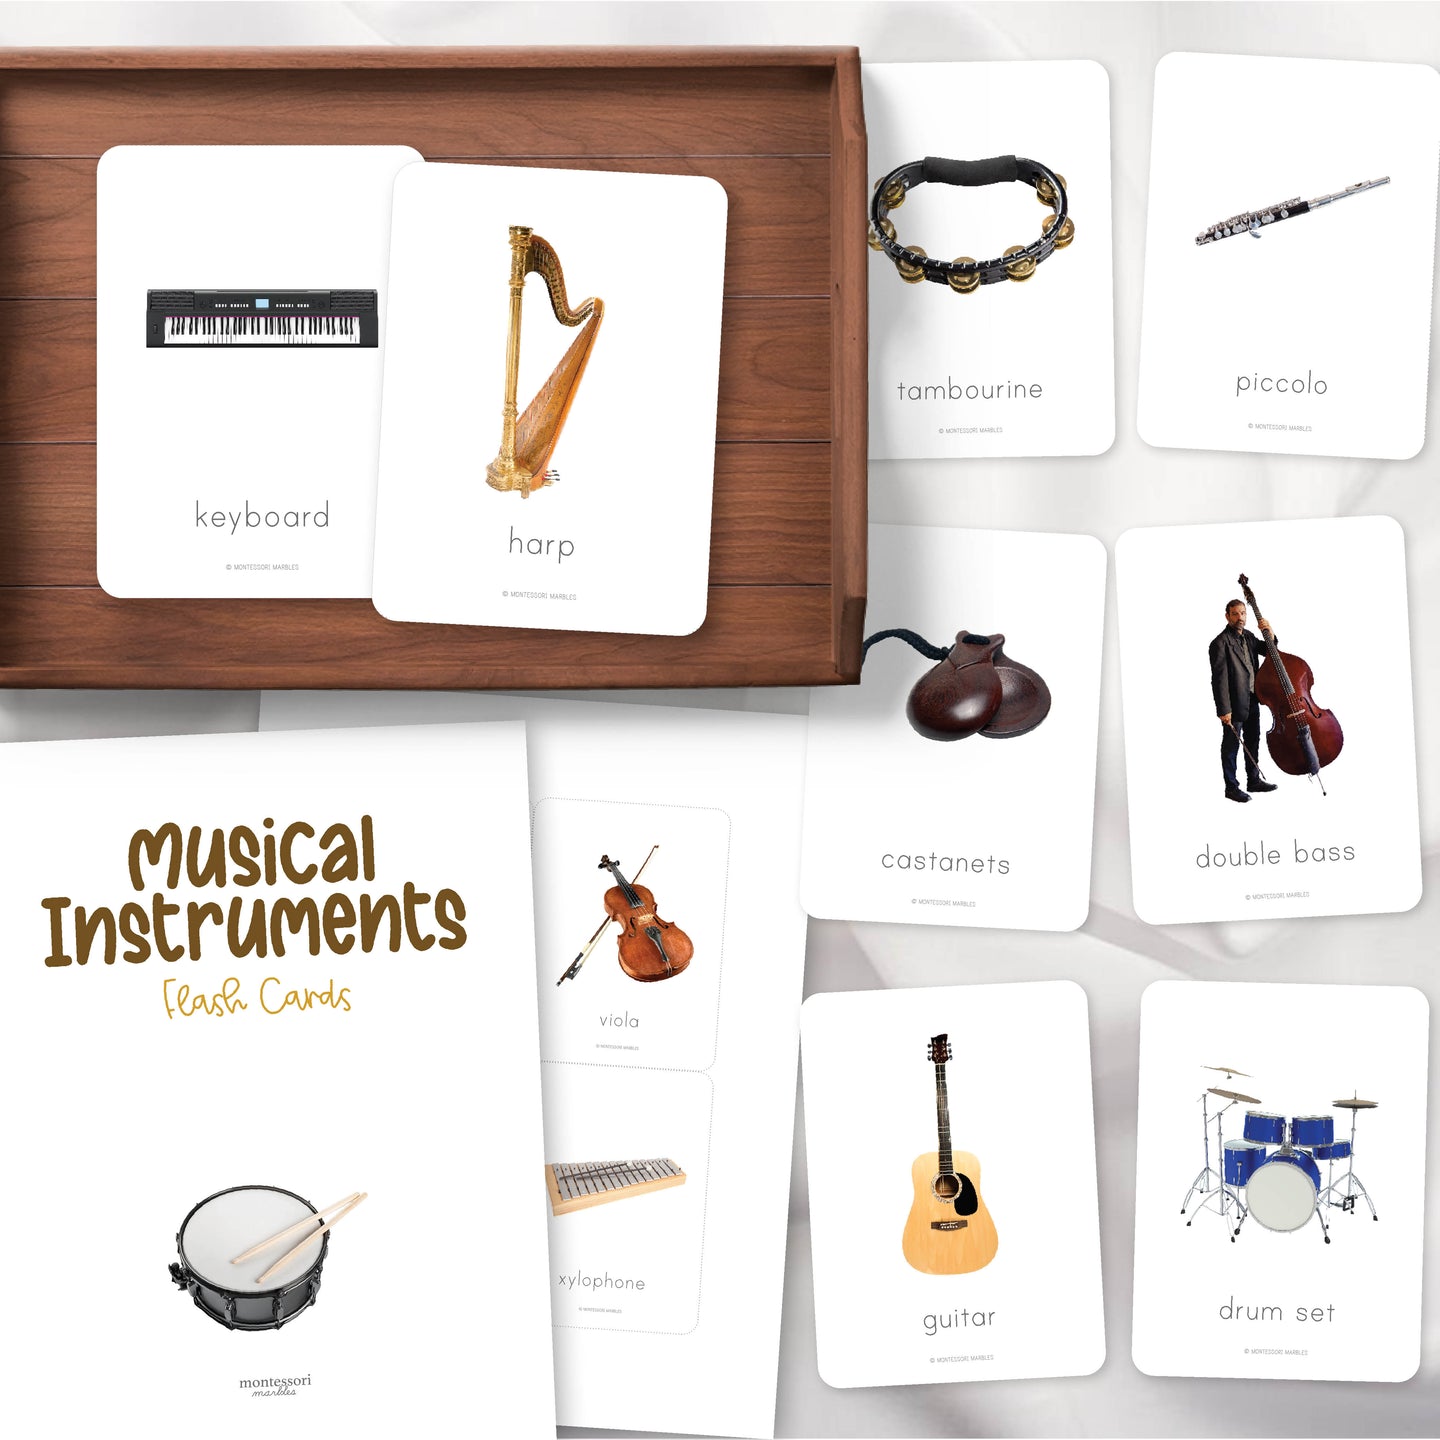 Musical Instruments Flash Cards